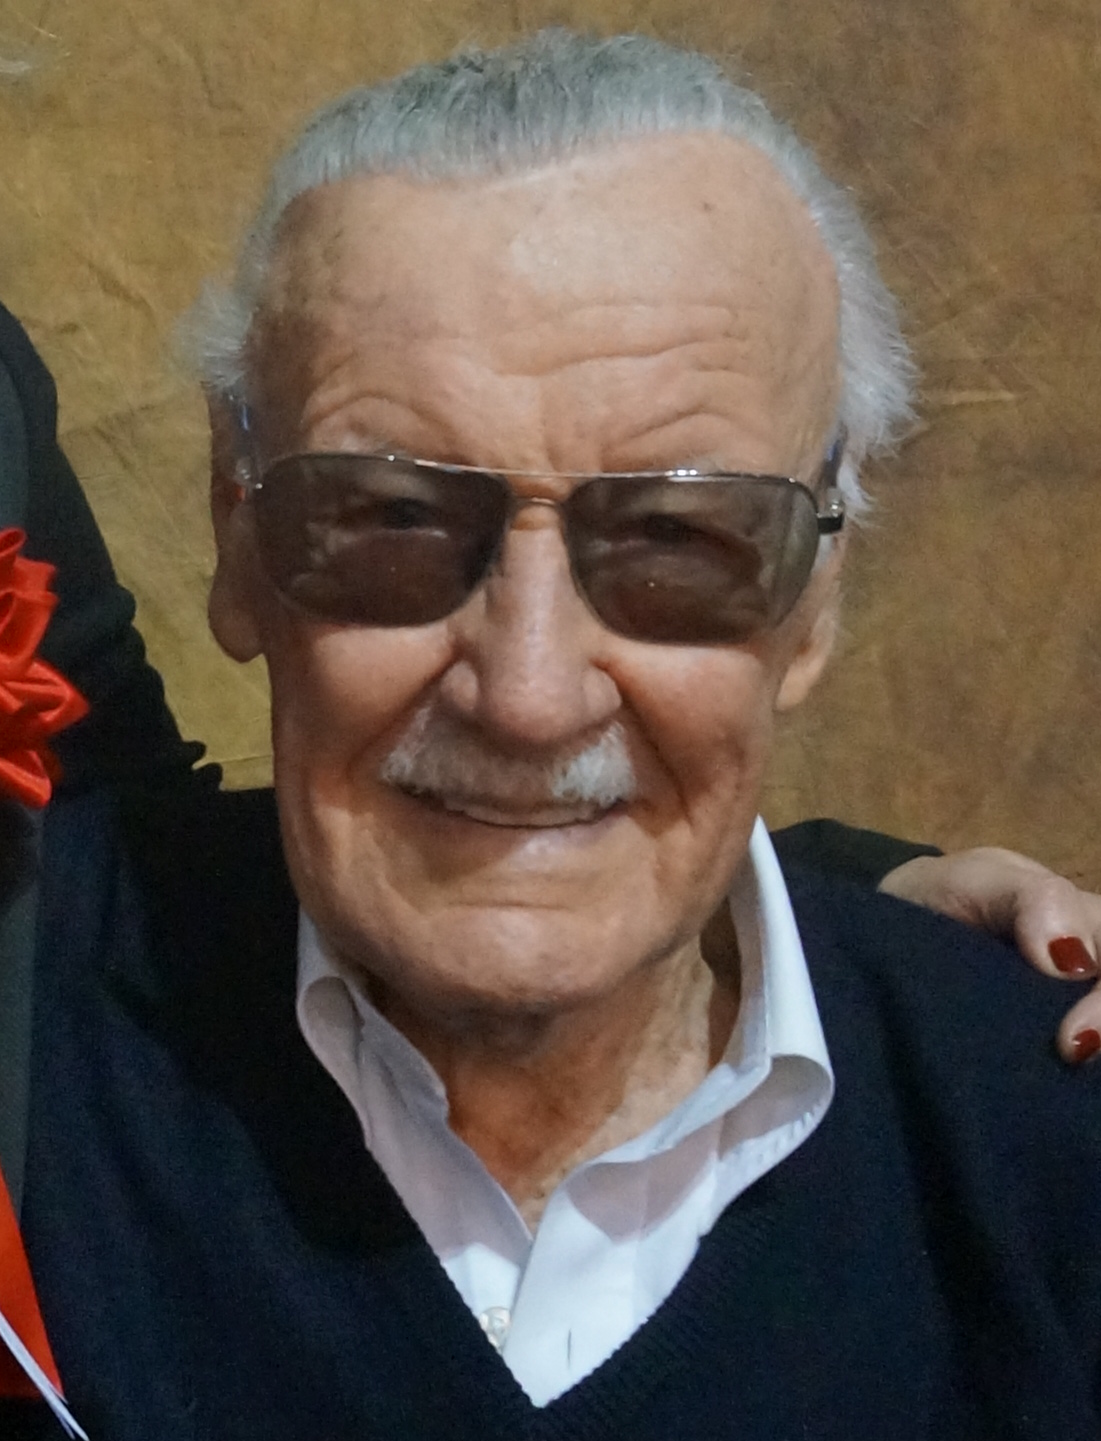 Stan Lee December 20161 - for some reason we don't have an alt tag here